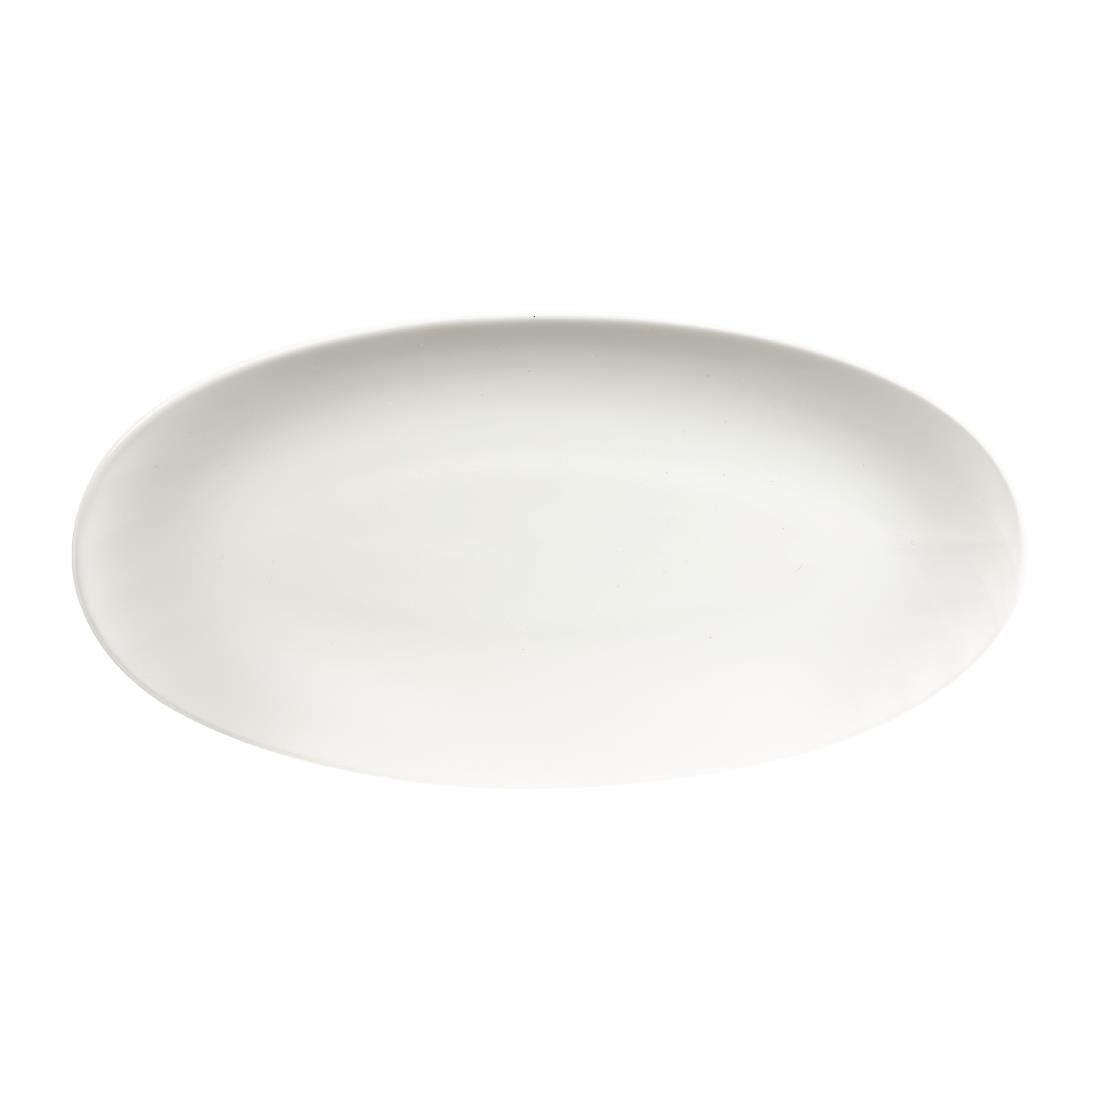 Churchill Chefs Plates Oval Plates White 347mm (Pack of 6) JD Catering Equipment Solutions Ltd